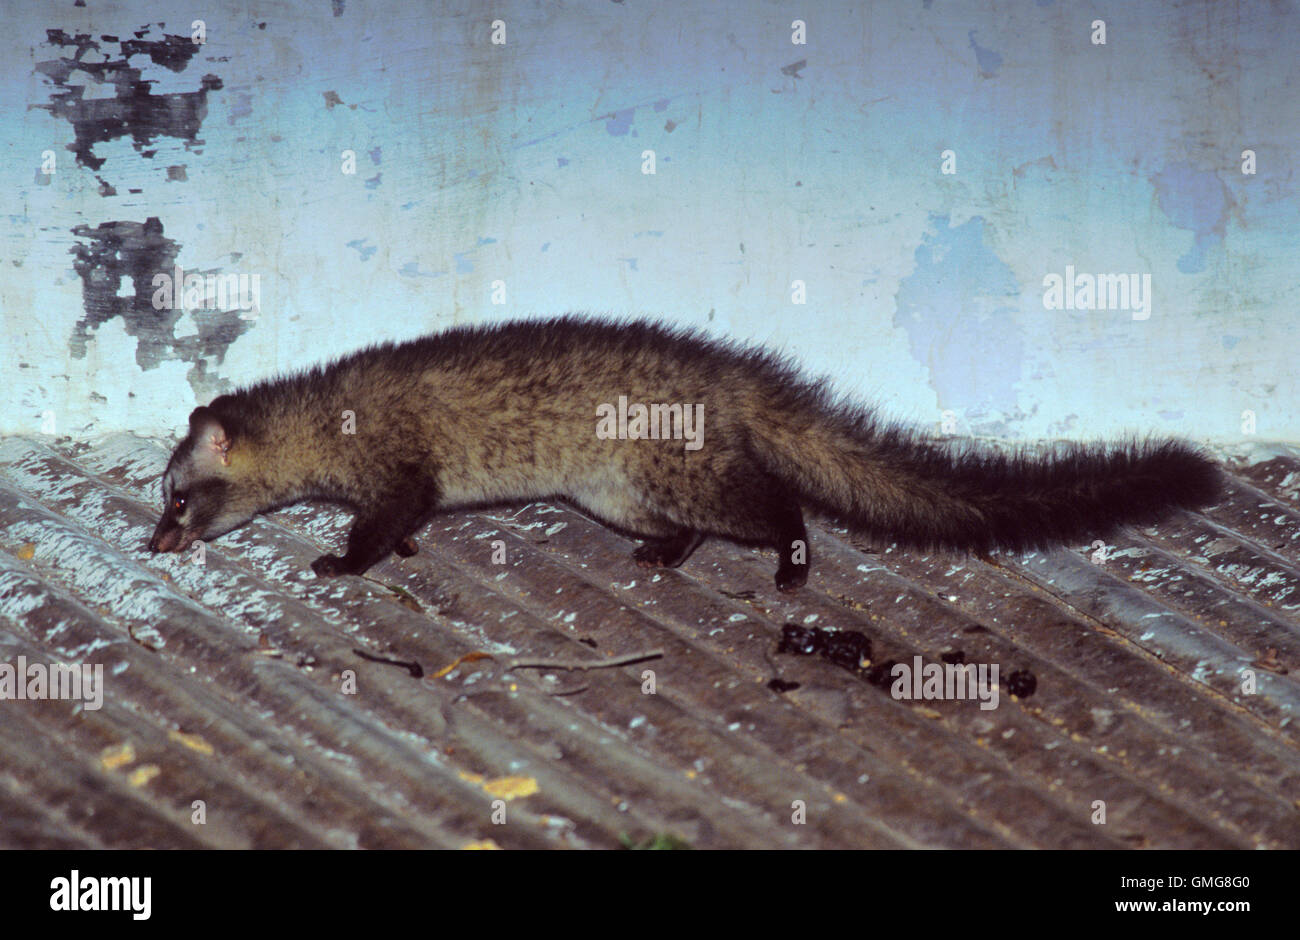 Common Palm Civet Asian Palm Civet Or Toddy Cat Paradoxurus Hermaphroditus On Corrugated Metal Roof Rajasthan India Stock Photo Alamy